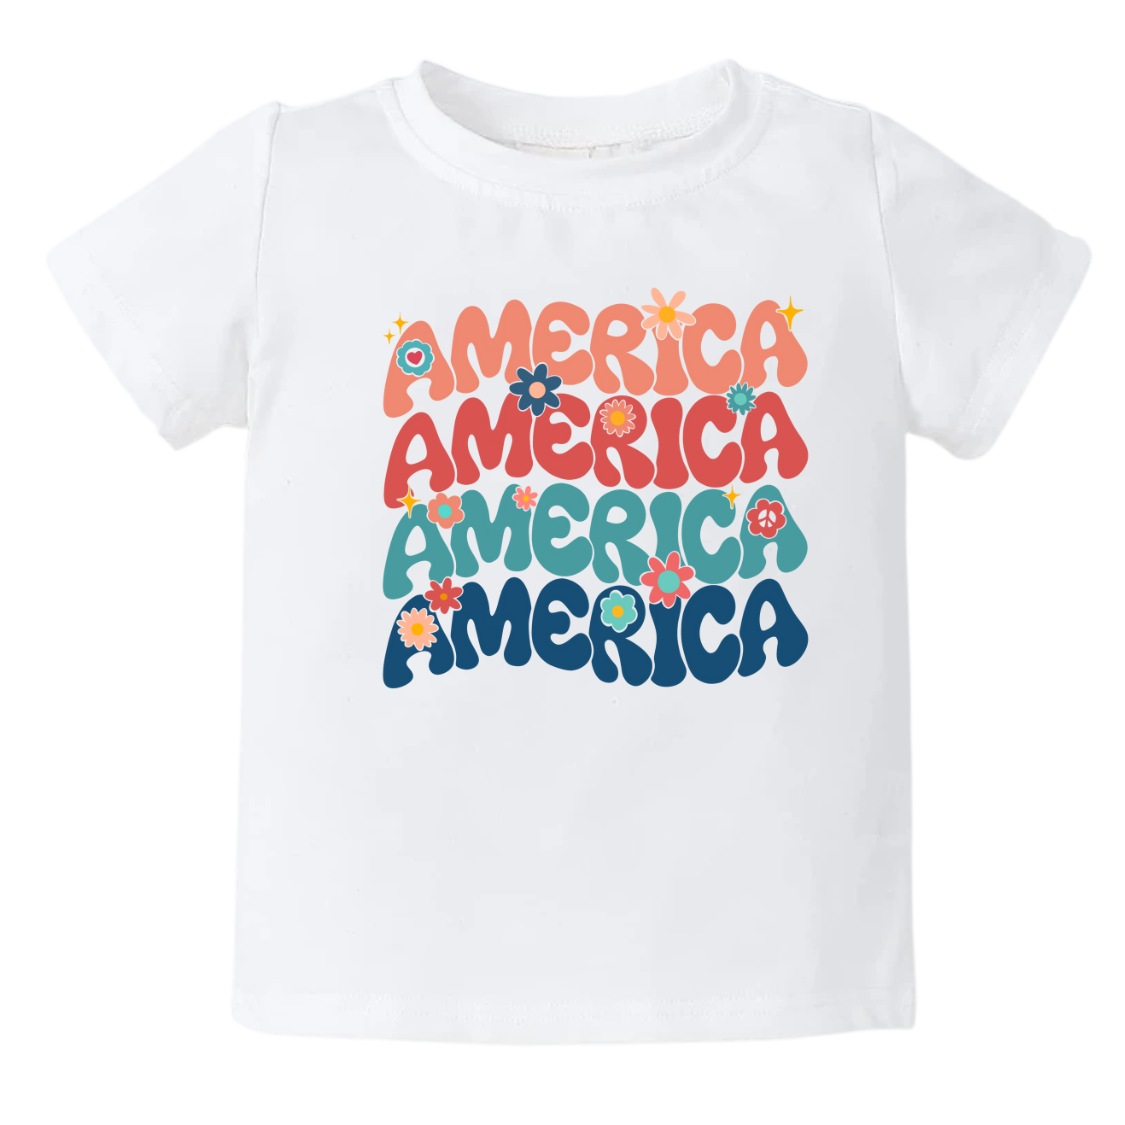 Cute Shirt Baby Onesie® America Retro Fourth of July Baby Clothing for Baby Shower